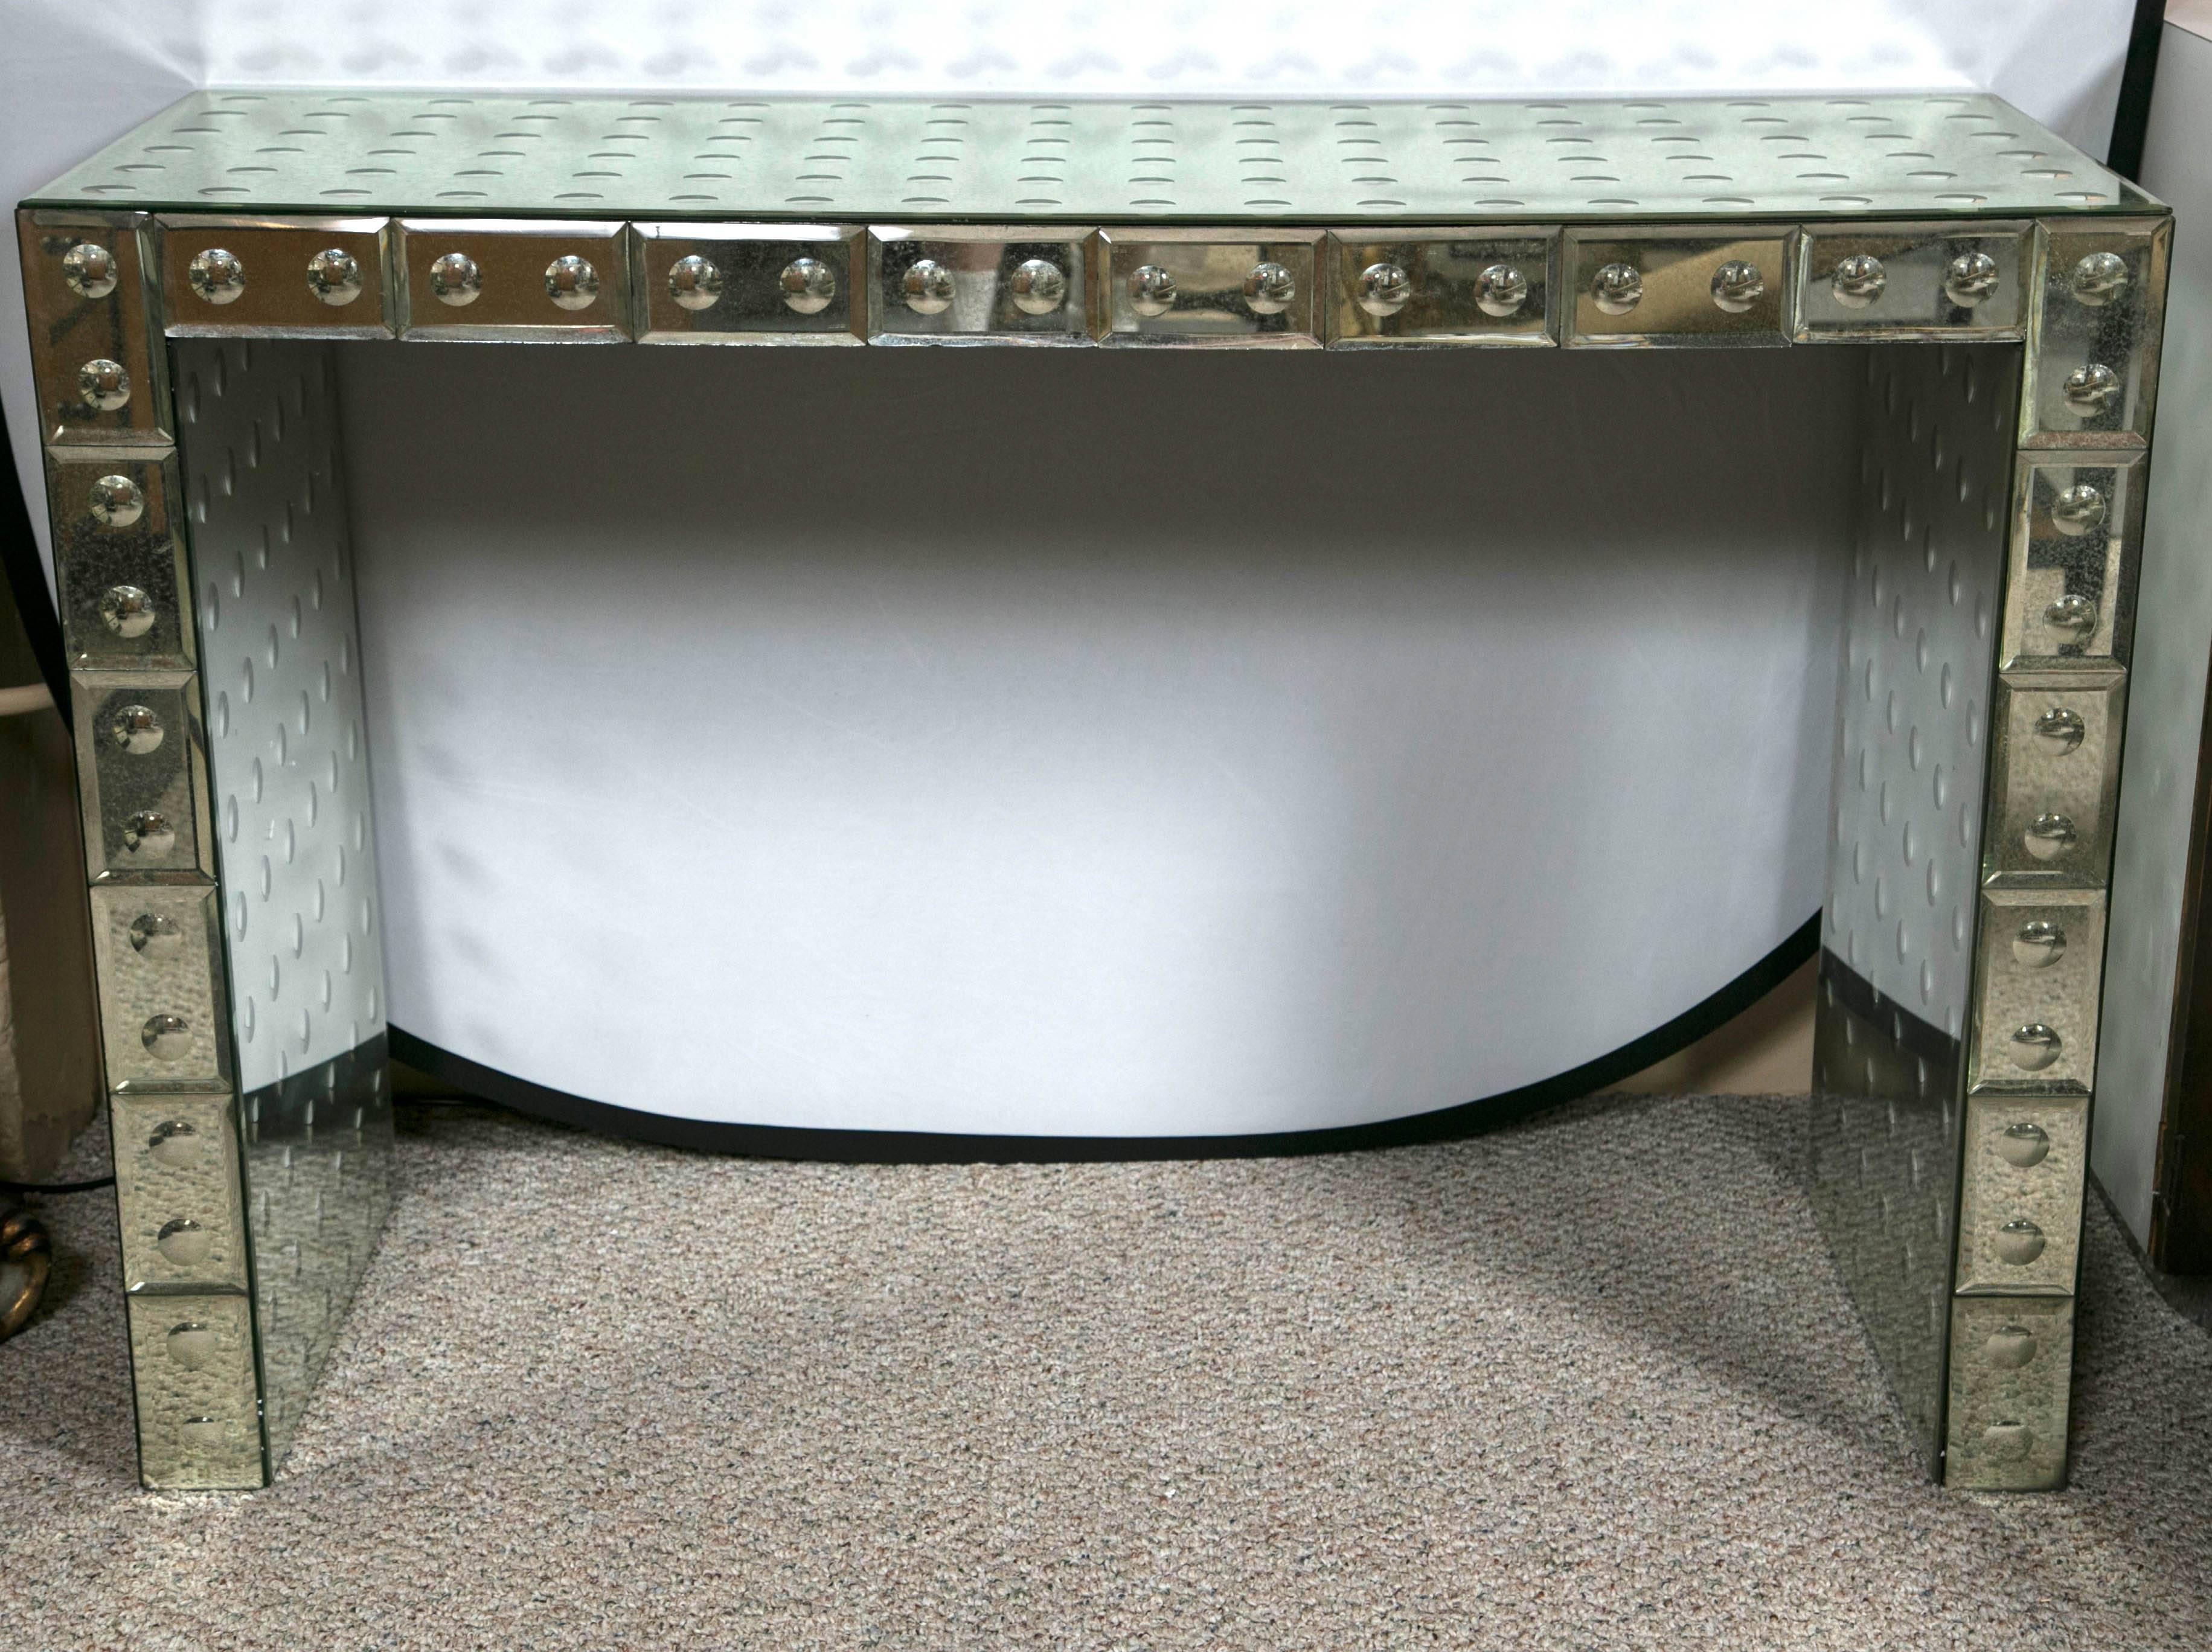  Bullseye decorated block front console. Fabulously Vintage Hollywood Regency design and style. A solid frame with great spacious tops. This console will make a wonderfully glamorous statement in any section of the home.